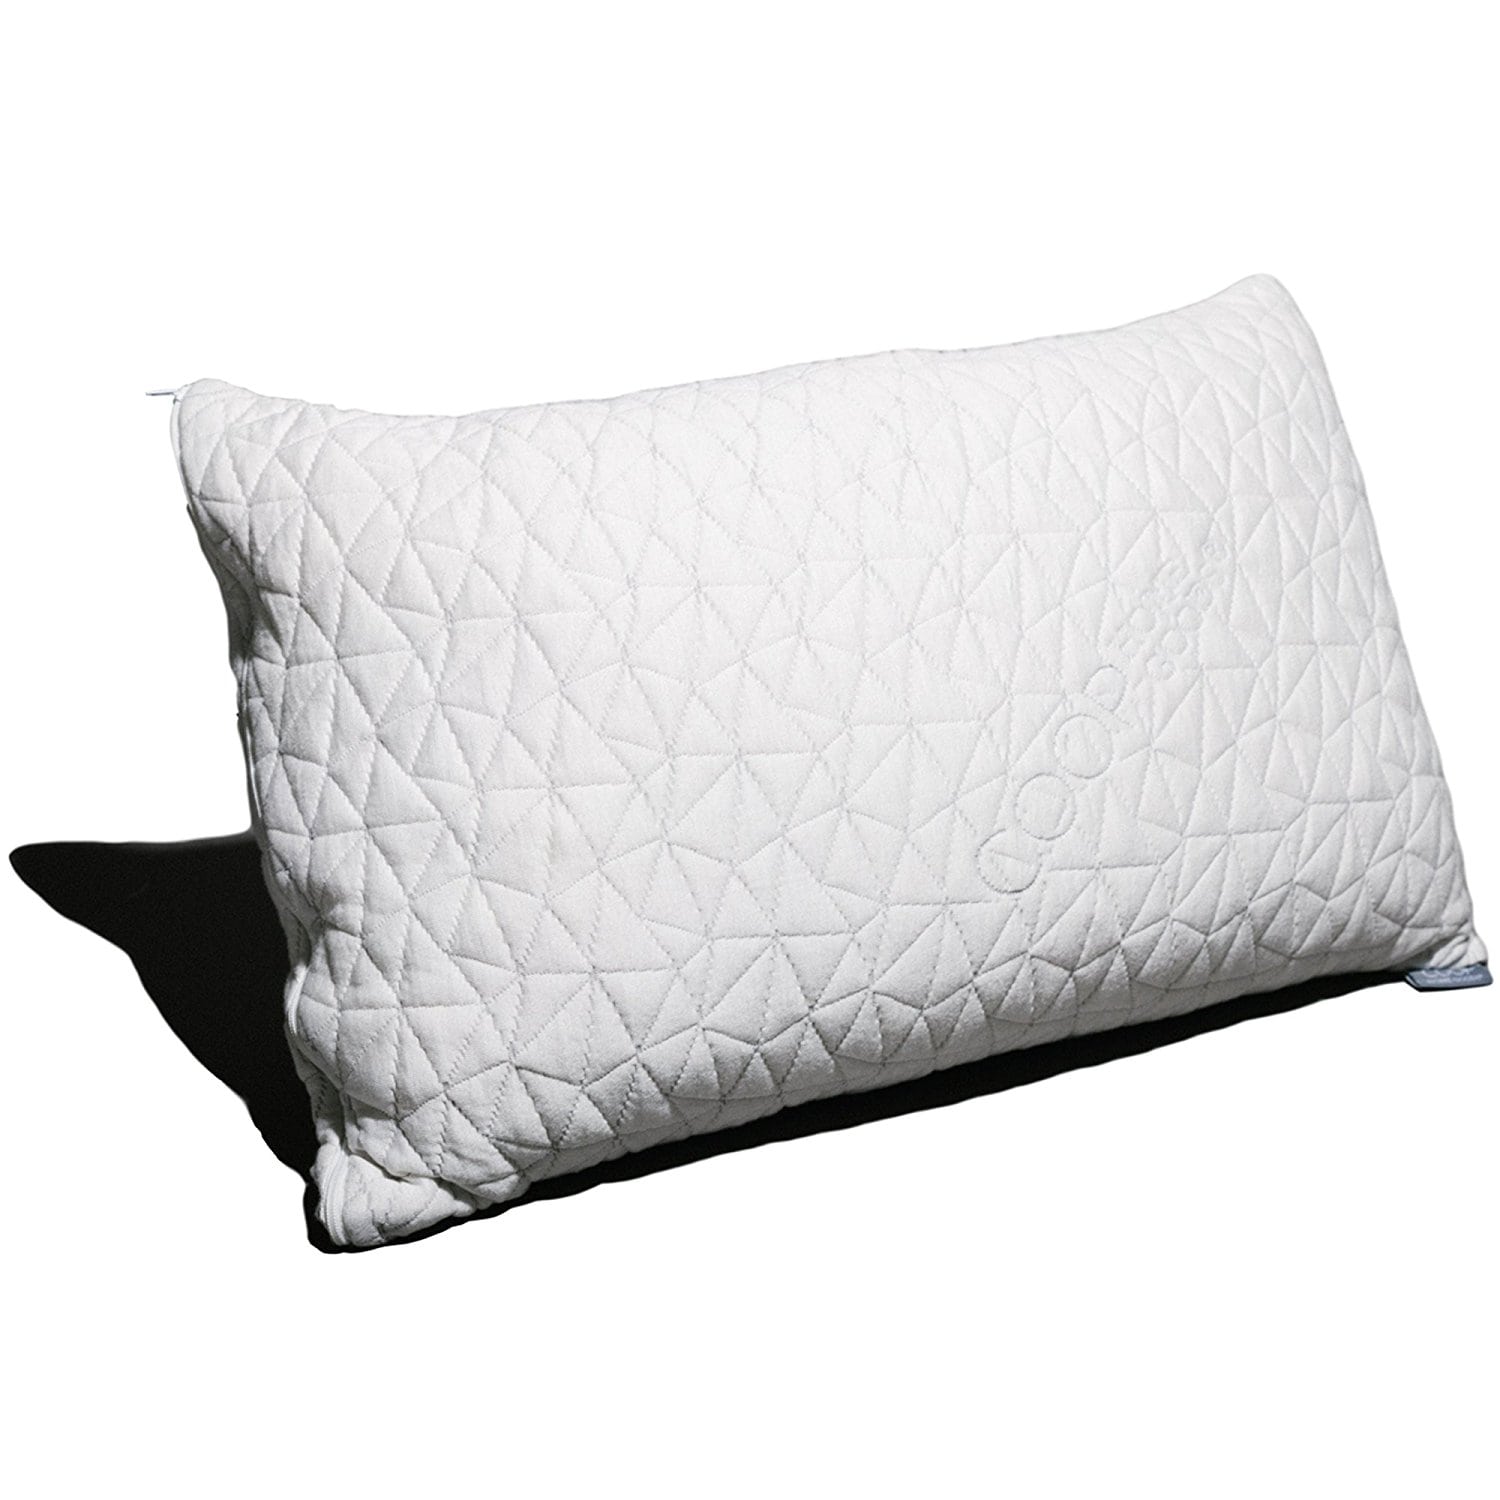 Read more about the article Coop Home Goods – Premium Adjustable Loft – Shredded Hypoallergenic Certipur Memory Foam Pillow with Washable Removable Cover